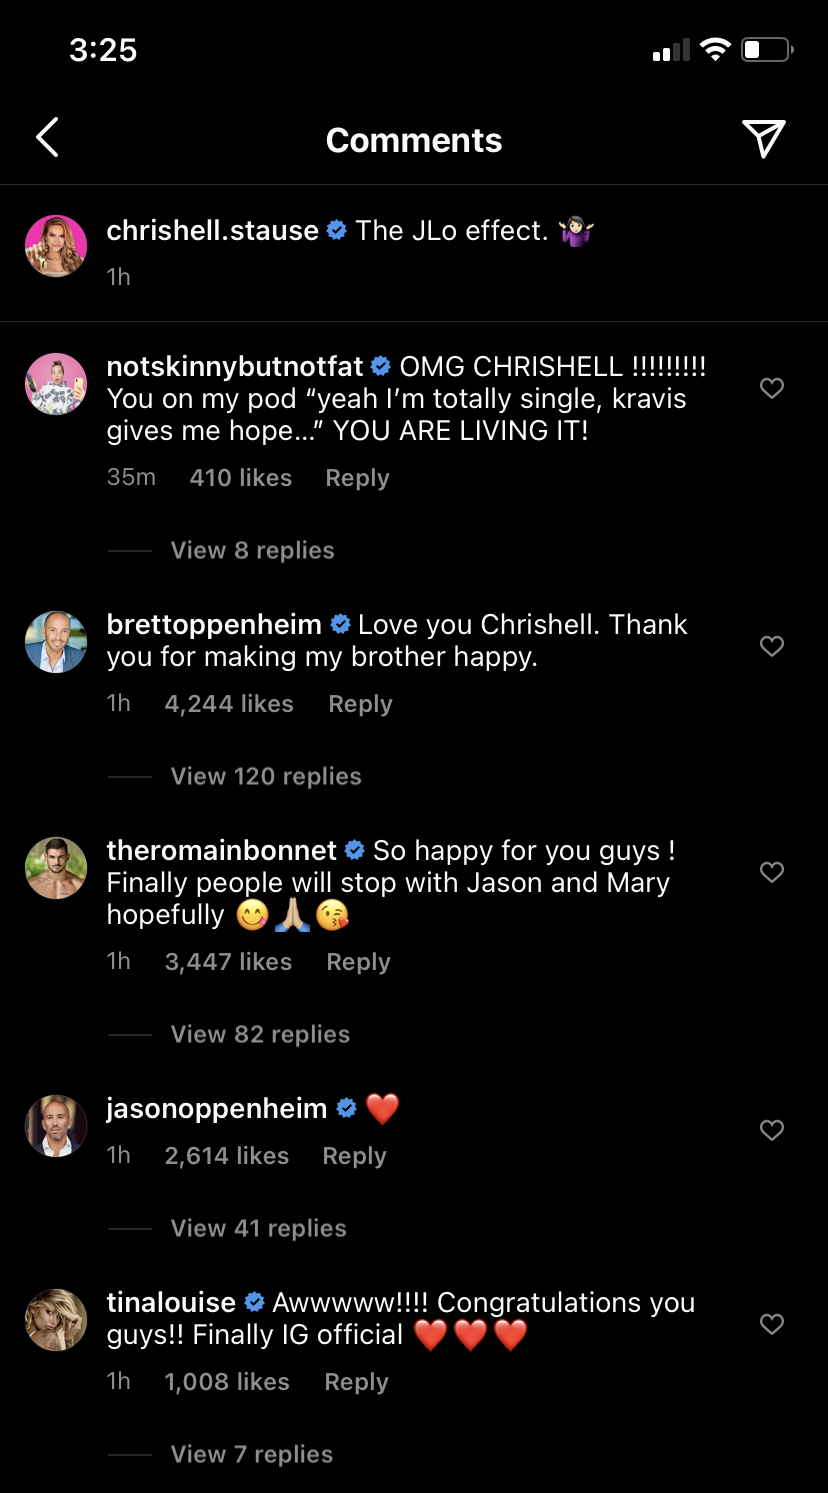 chrishell comments